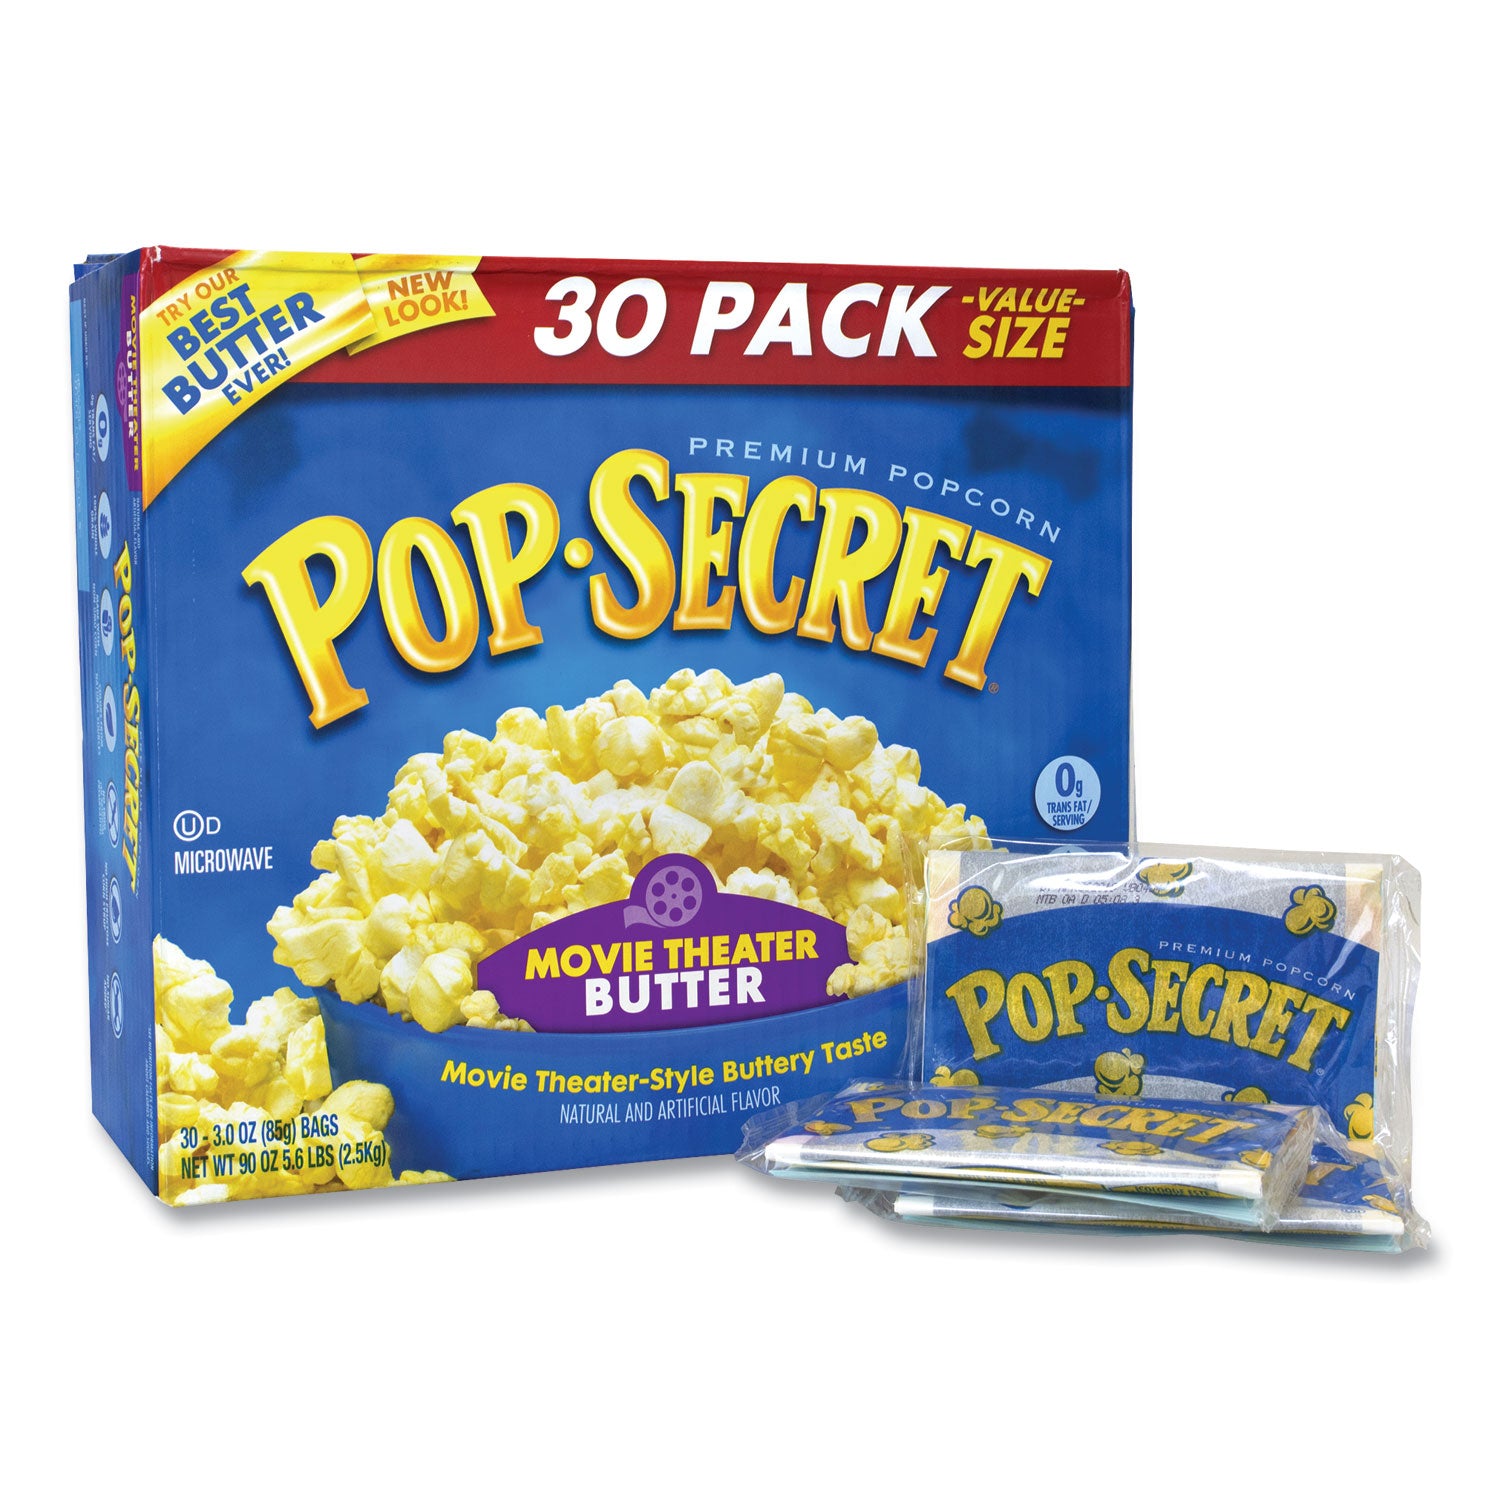 microwave-popcorn-movie-theater-butter-3-oz-bags-30-carton-ships-in-1-3-business-days_grr22000633 - 2